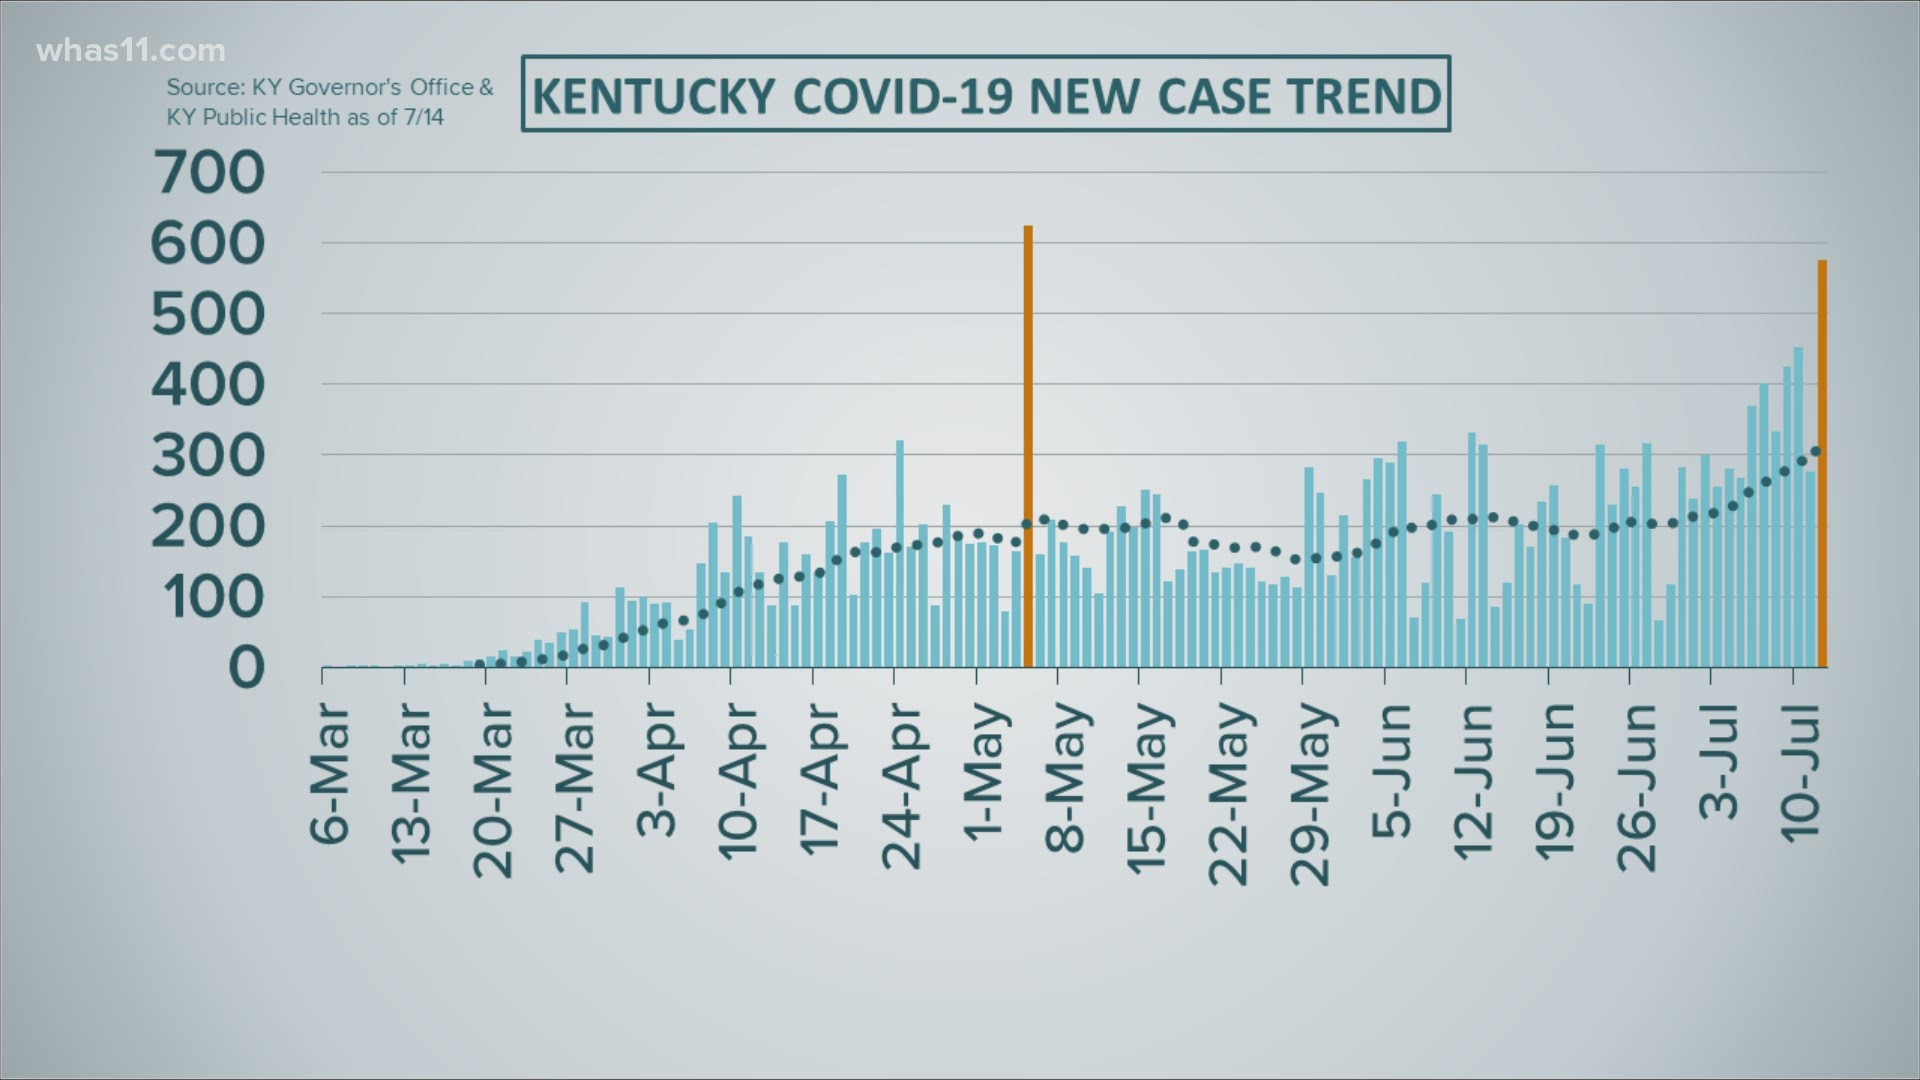 As COVID-19 testing increases, cases will also increase, but we're seeing highs that we haven't seen in Kentucky since May.